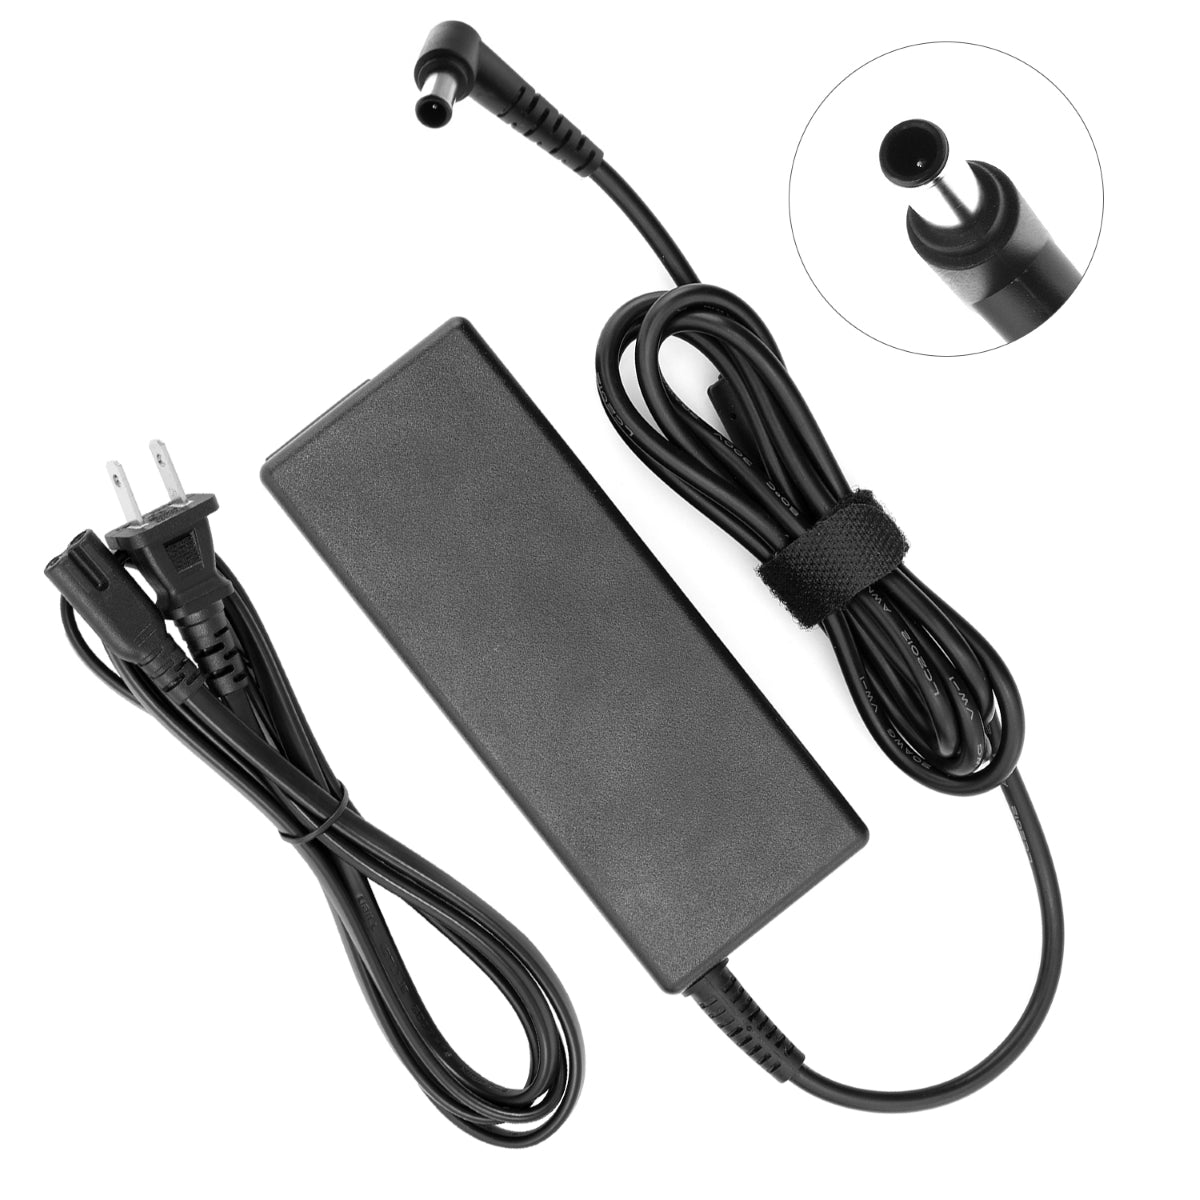 Power Adapter for LG 24LM500S-PU Monitor TV